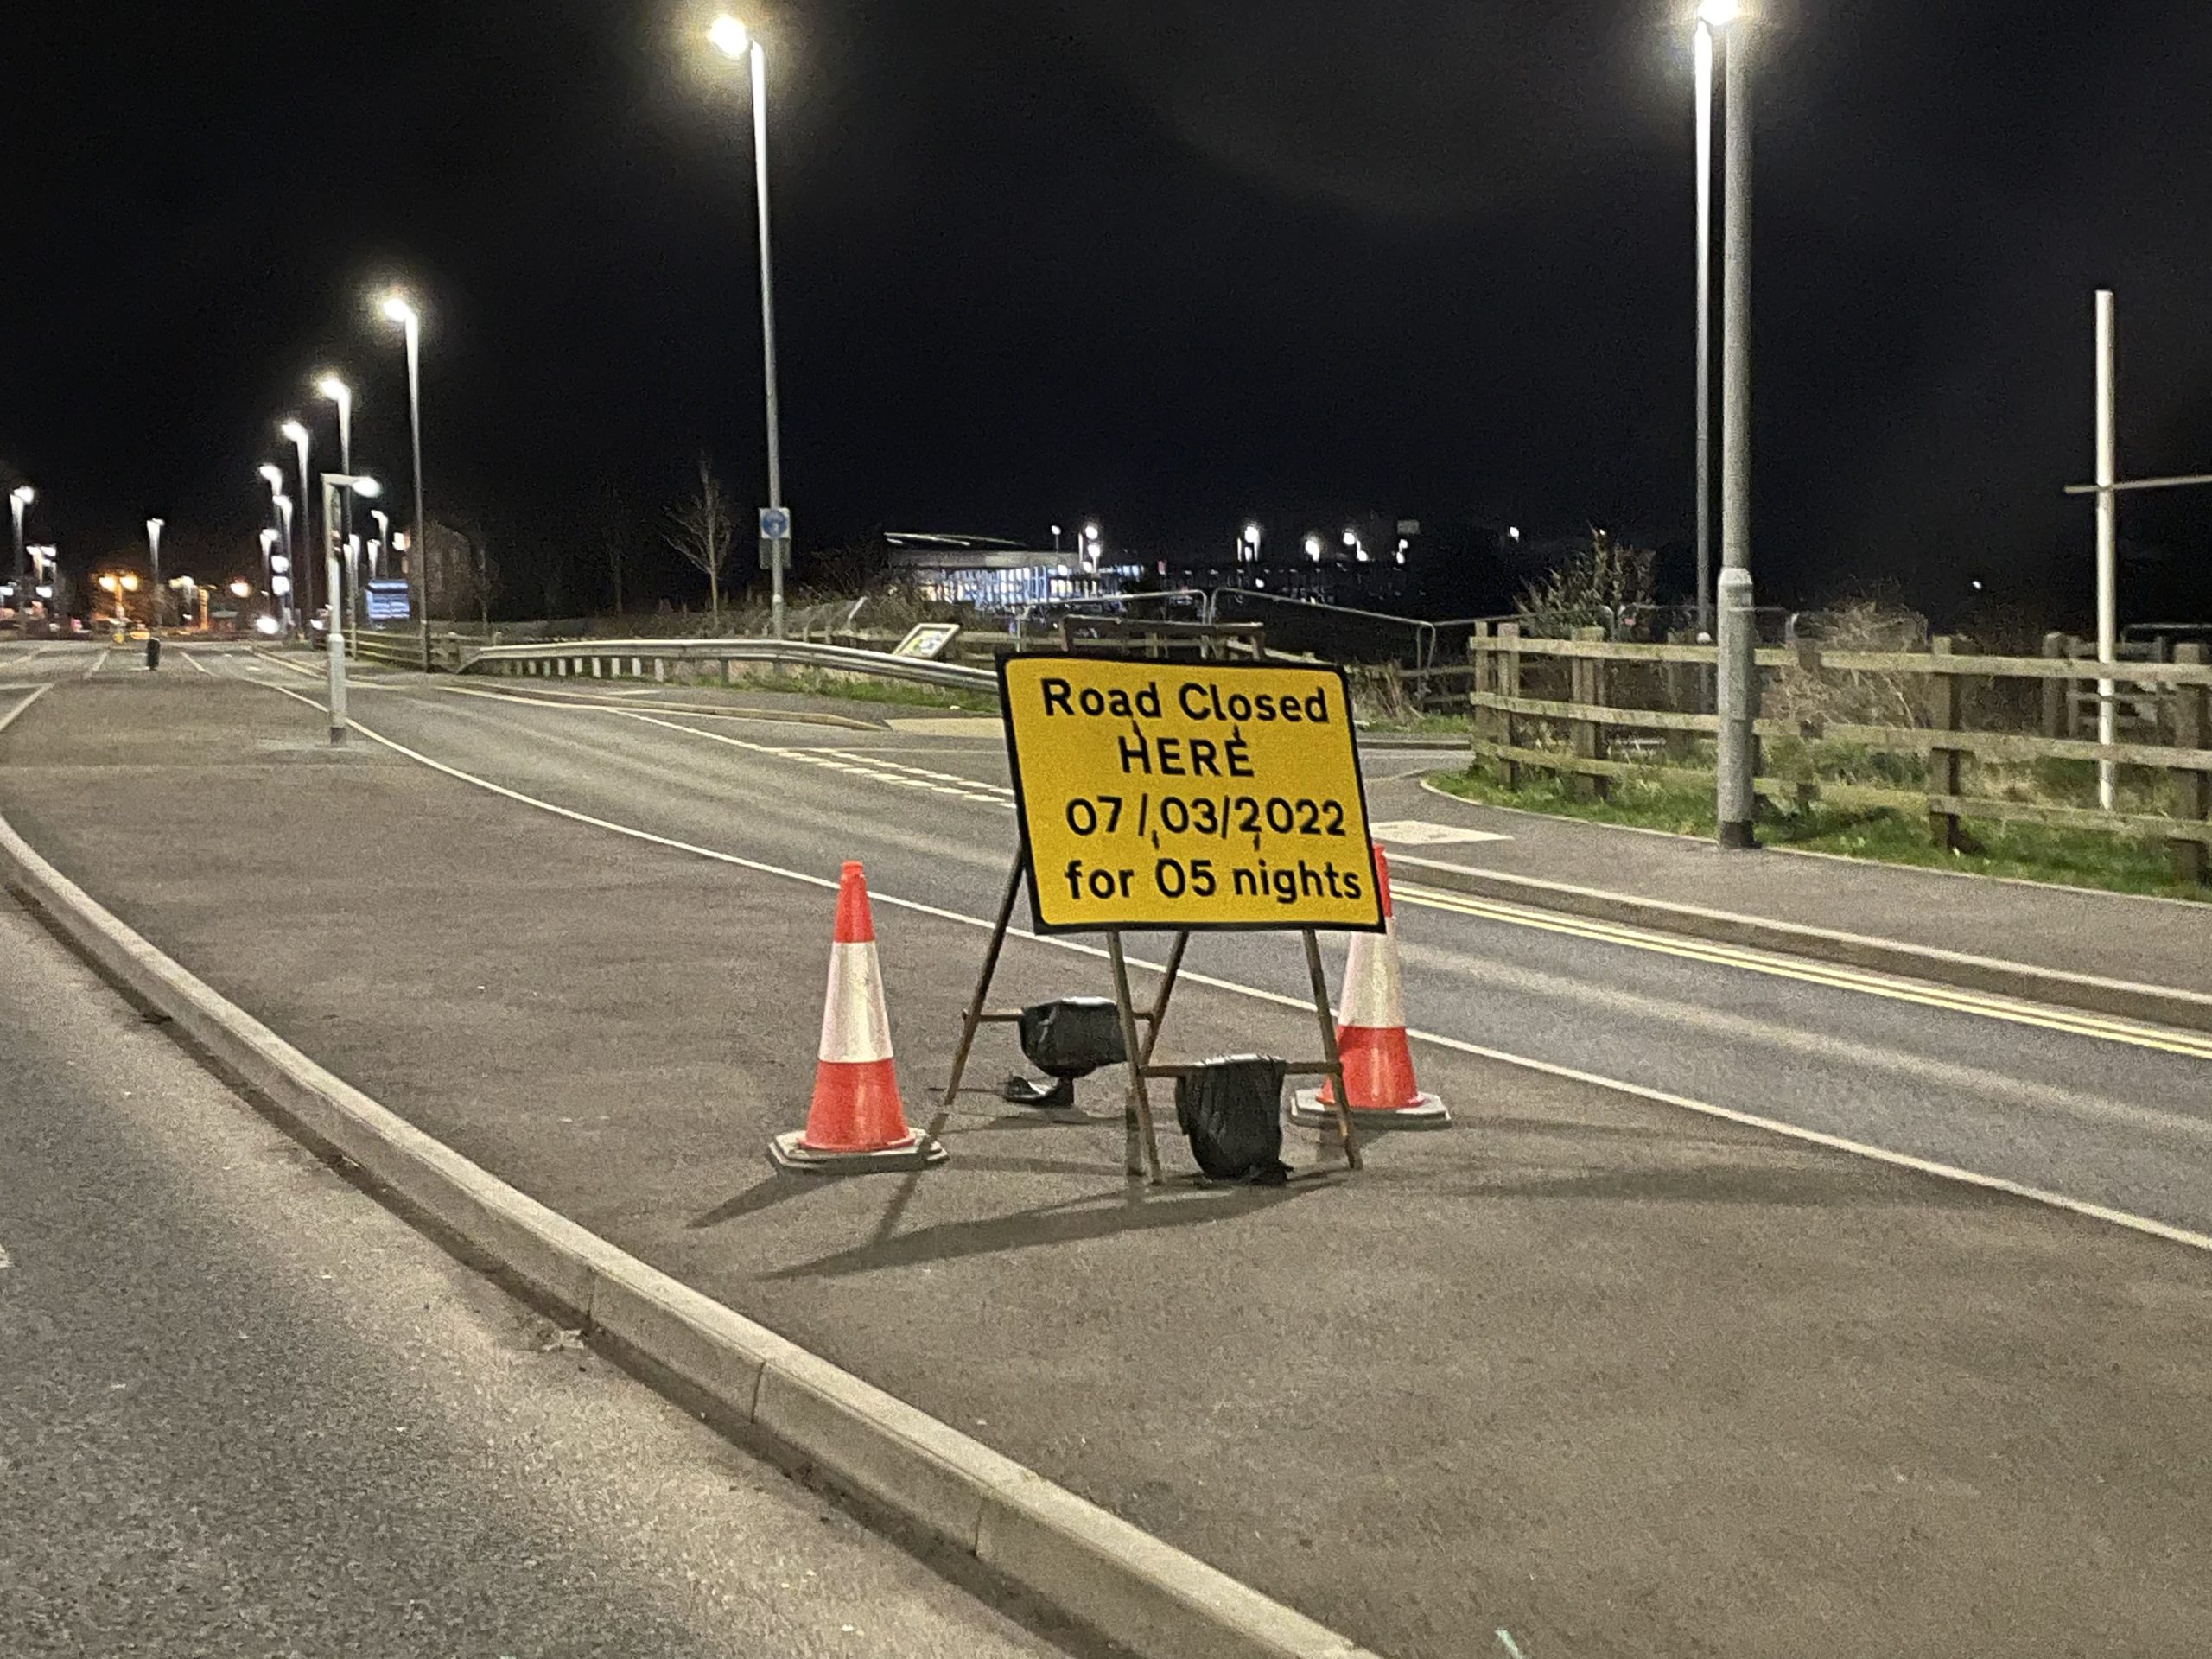 NEWS | The Hereford City Link Road will be closed overnight this week due to roadworks